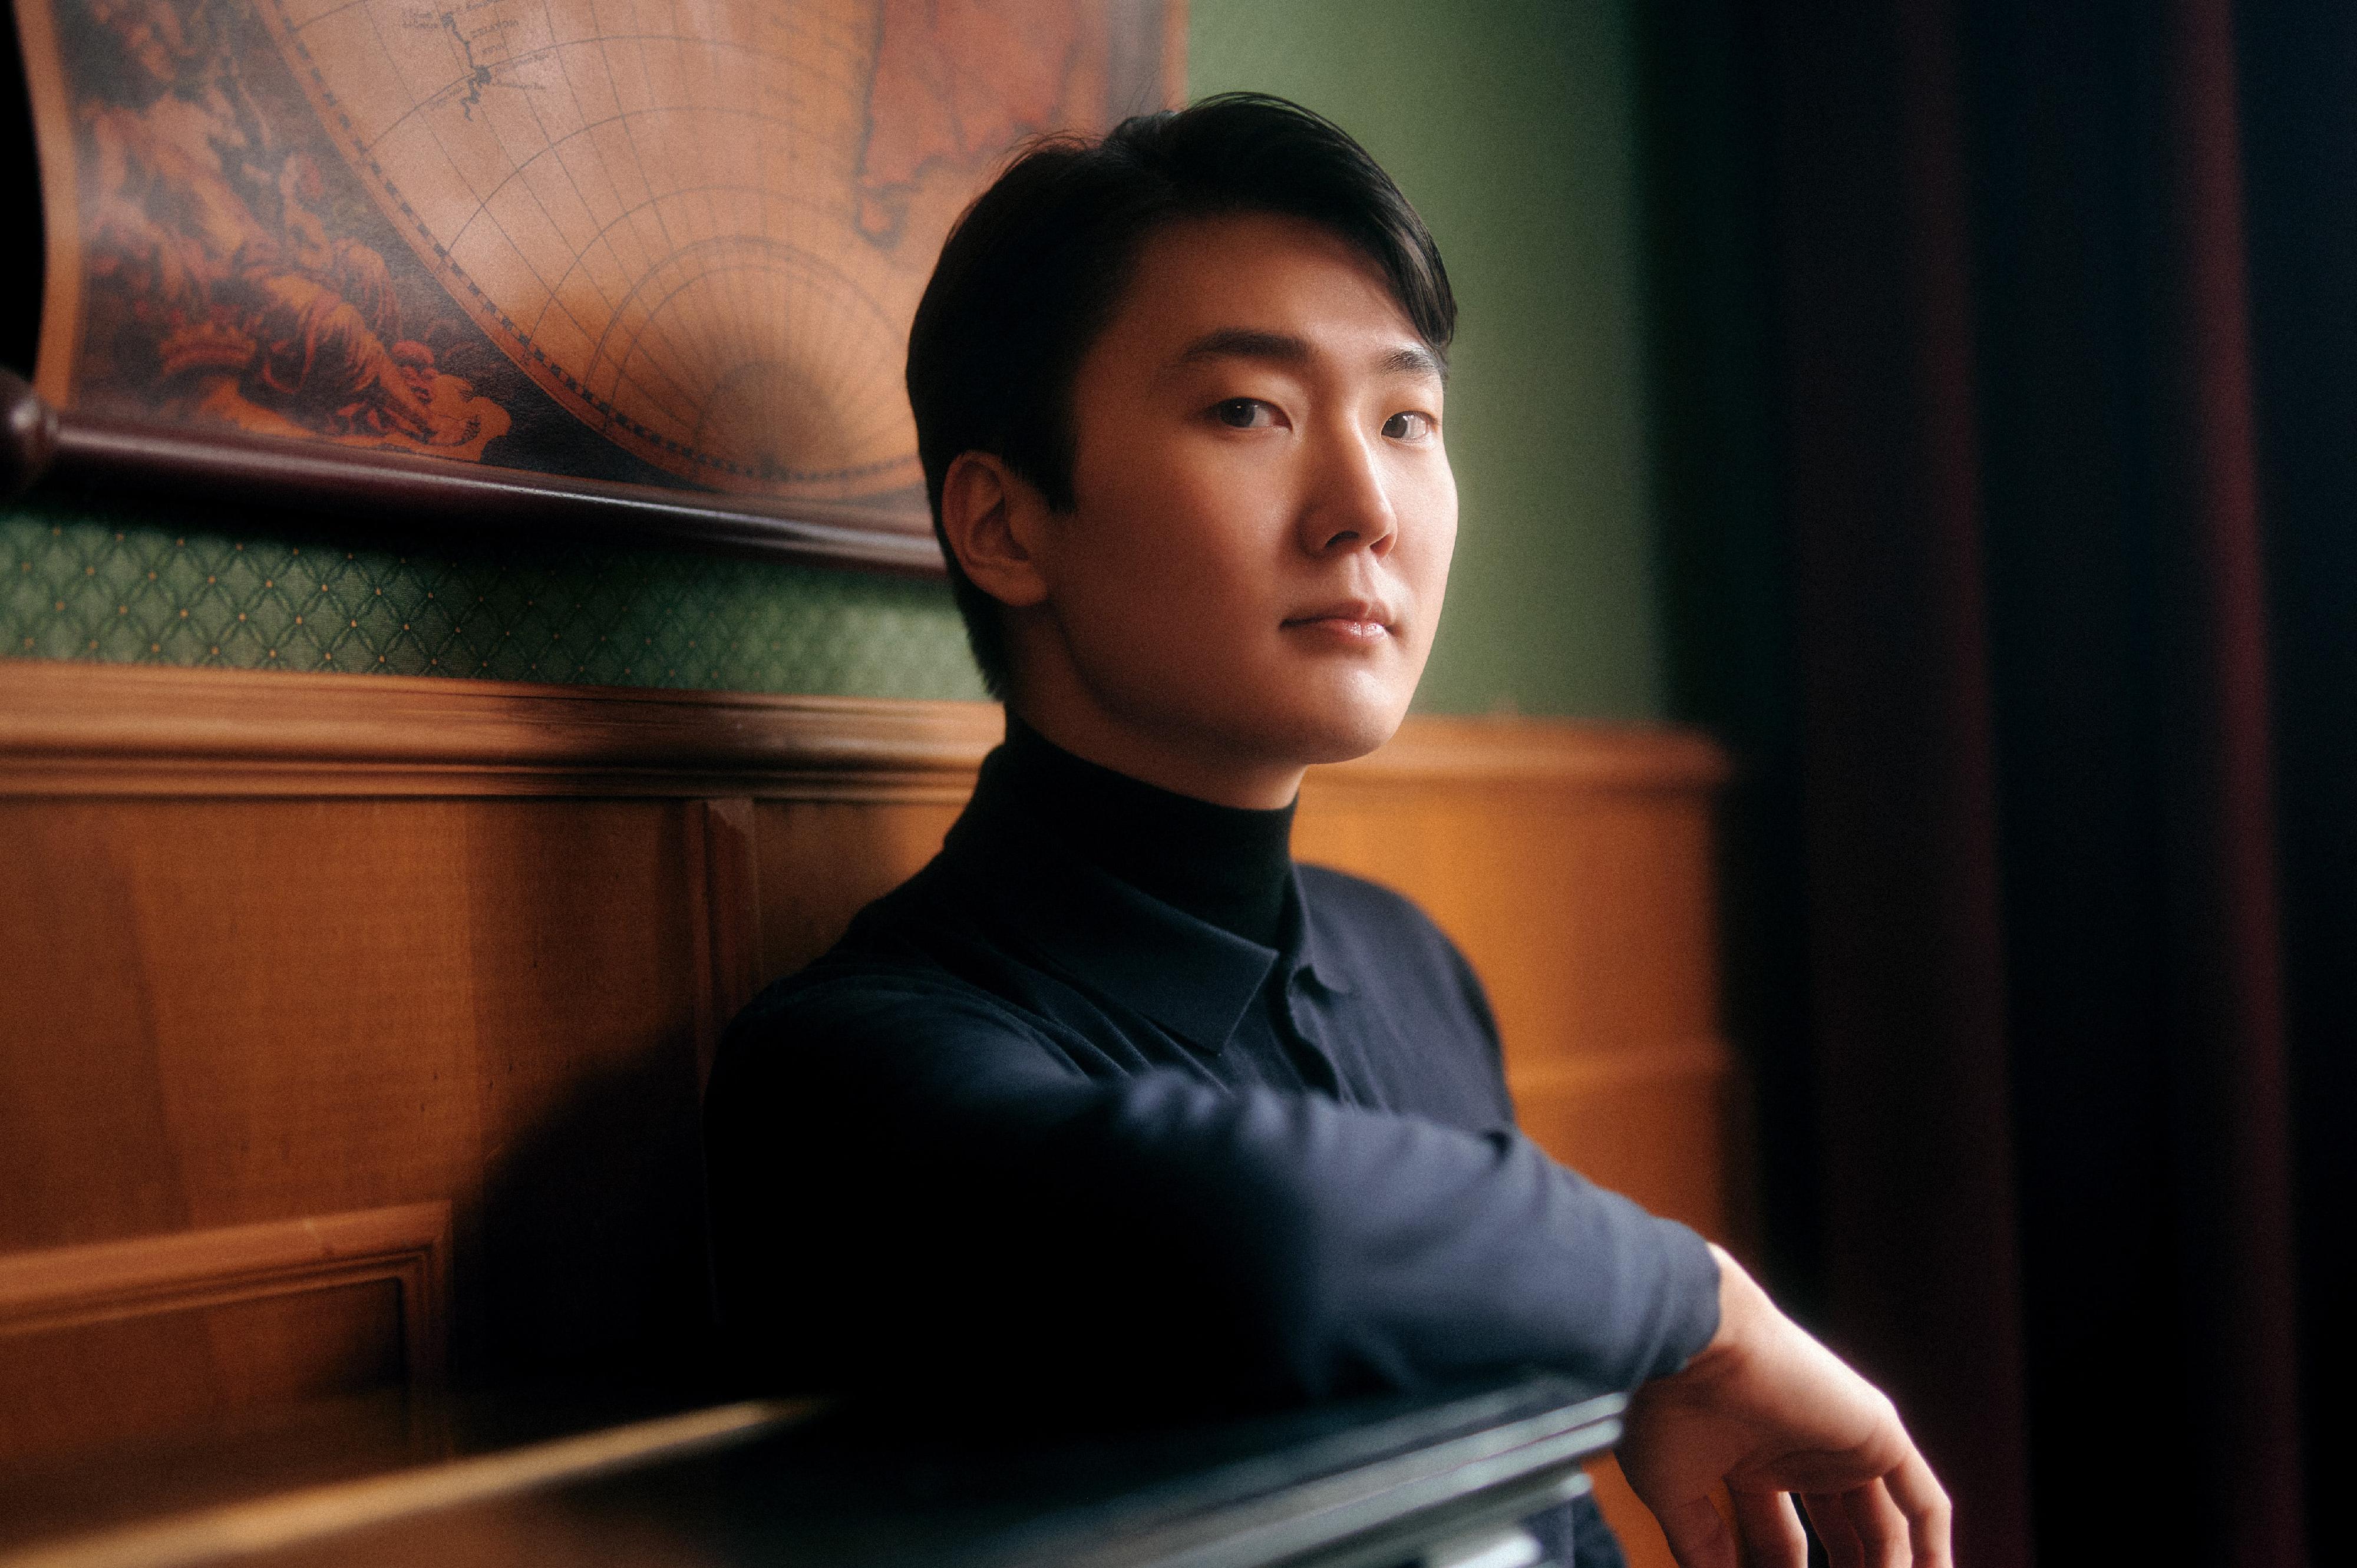 Highly sought-after pianist Seong-Jin Cho will give a recital in Hong Kong in November. Photo shows Cho. (Source of photo: Christoph Koestlin-DG)